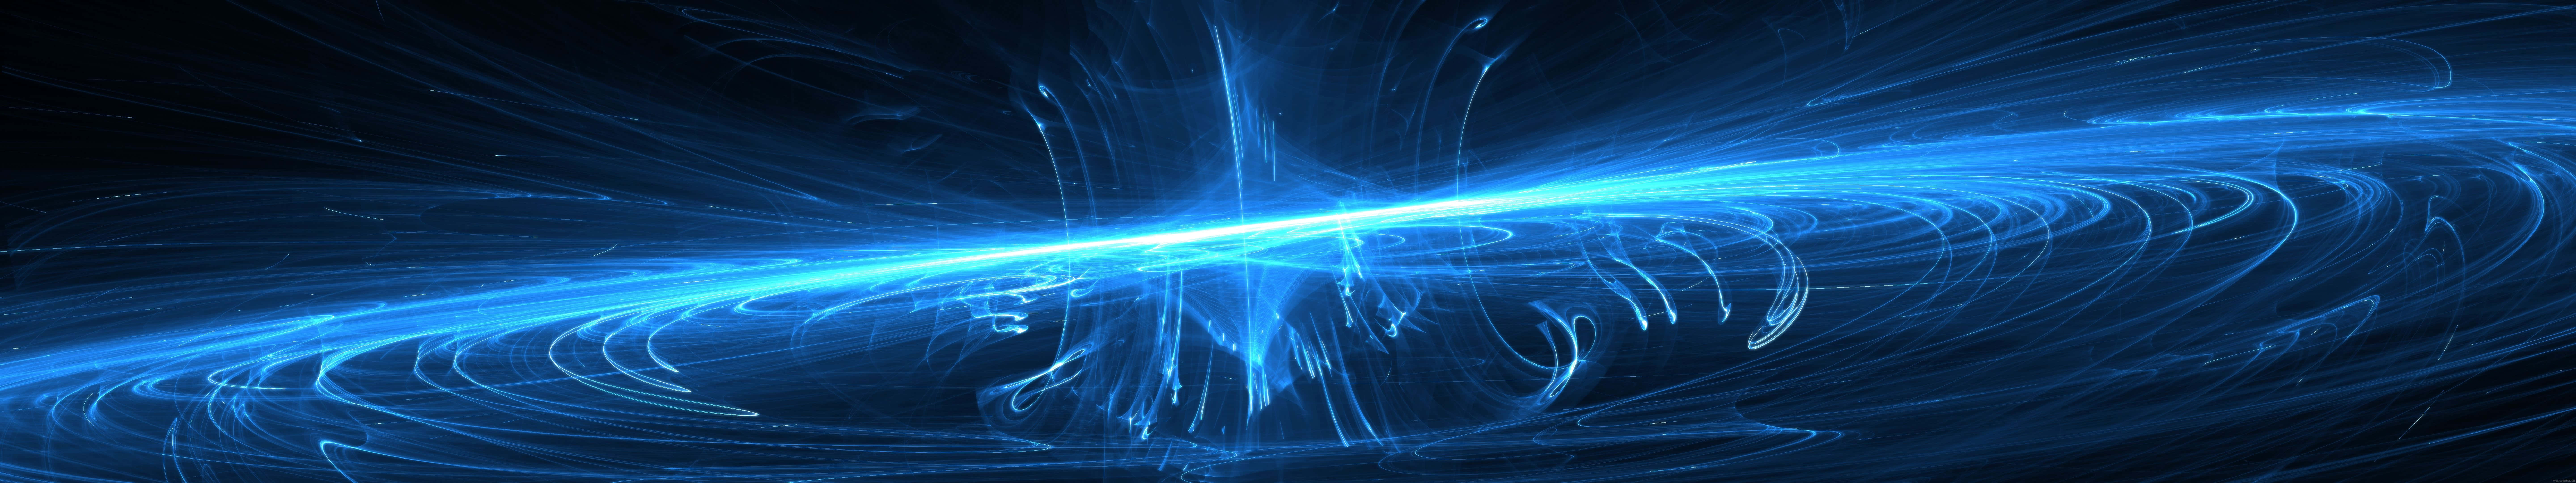 A Blue Light With A Swirling Pattern Wallpaper